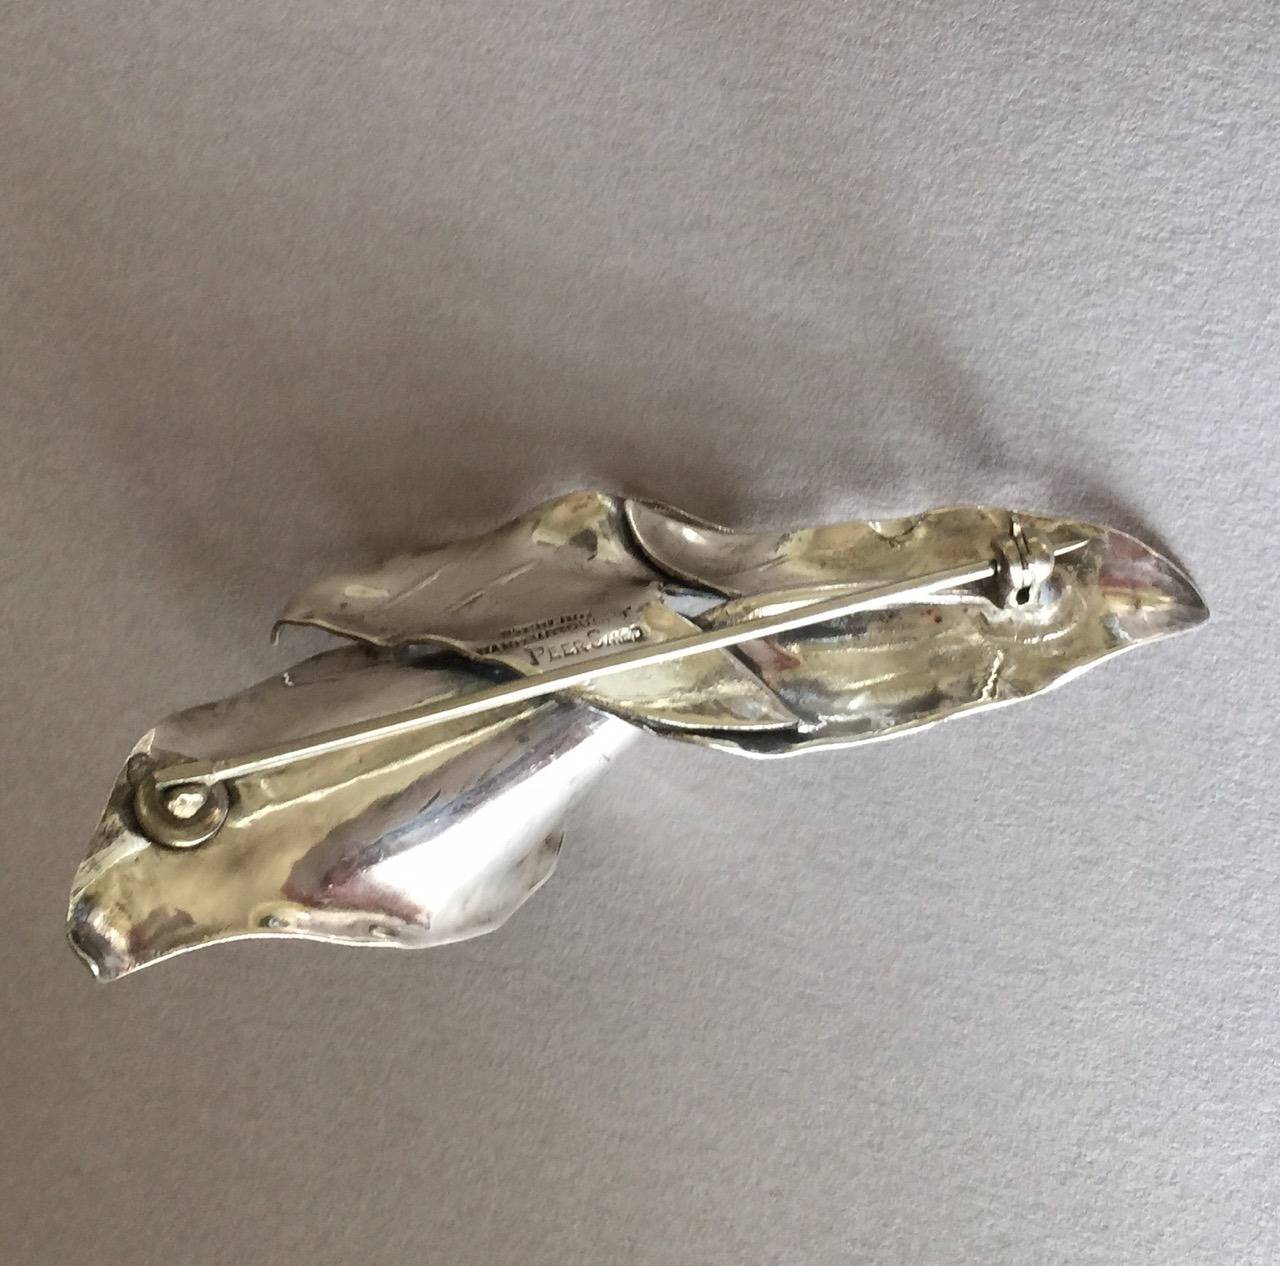 Signed and hallmarked hand wrought Peer Smed sterling silver. Highly sculptural and very three dimensional as if it was the actual flower.

Complimentary gift box and FREE shipping included.

About the artist:
Peer Smed (born Peer Schmidt) was born